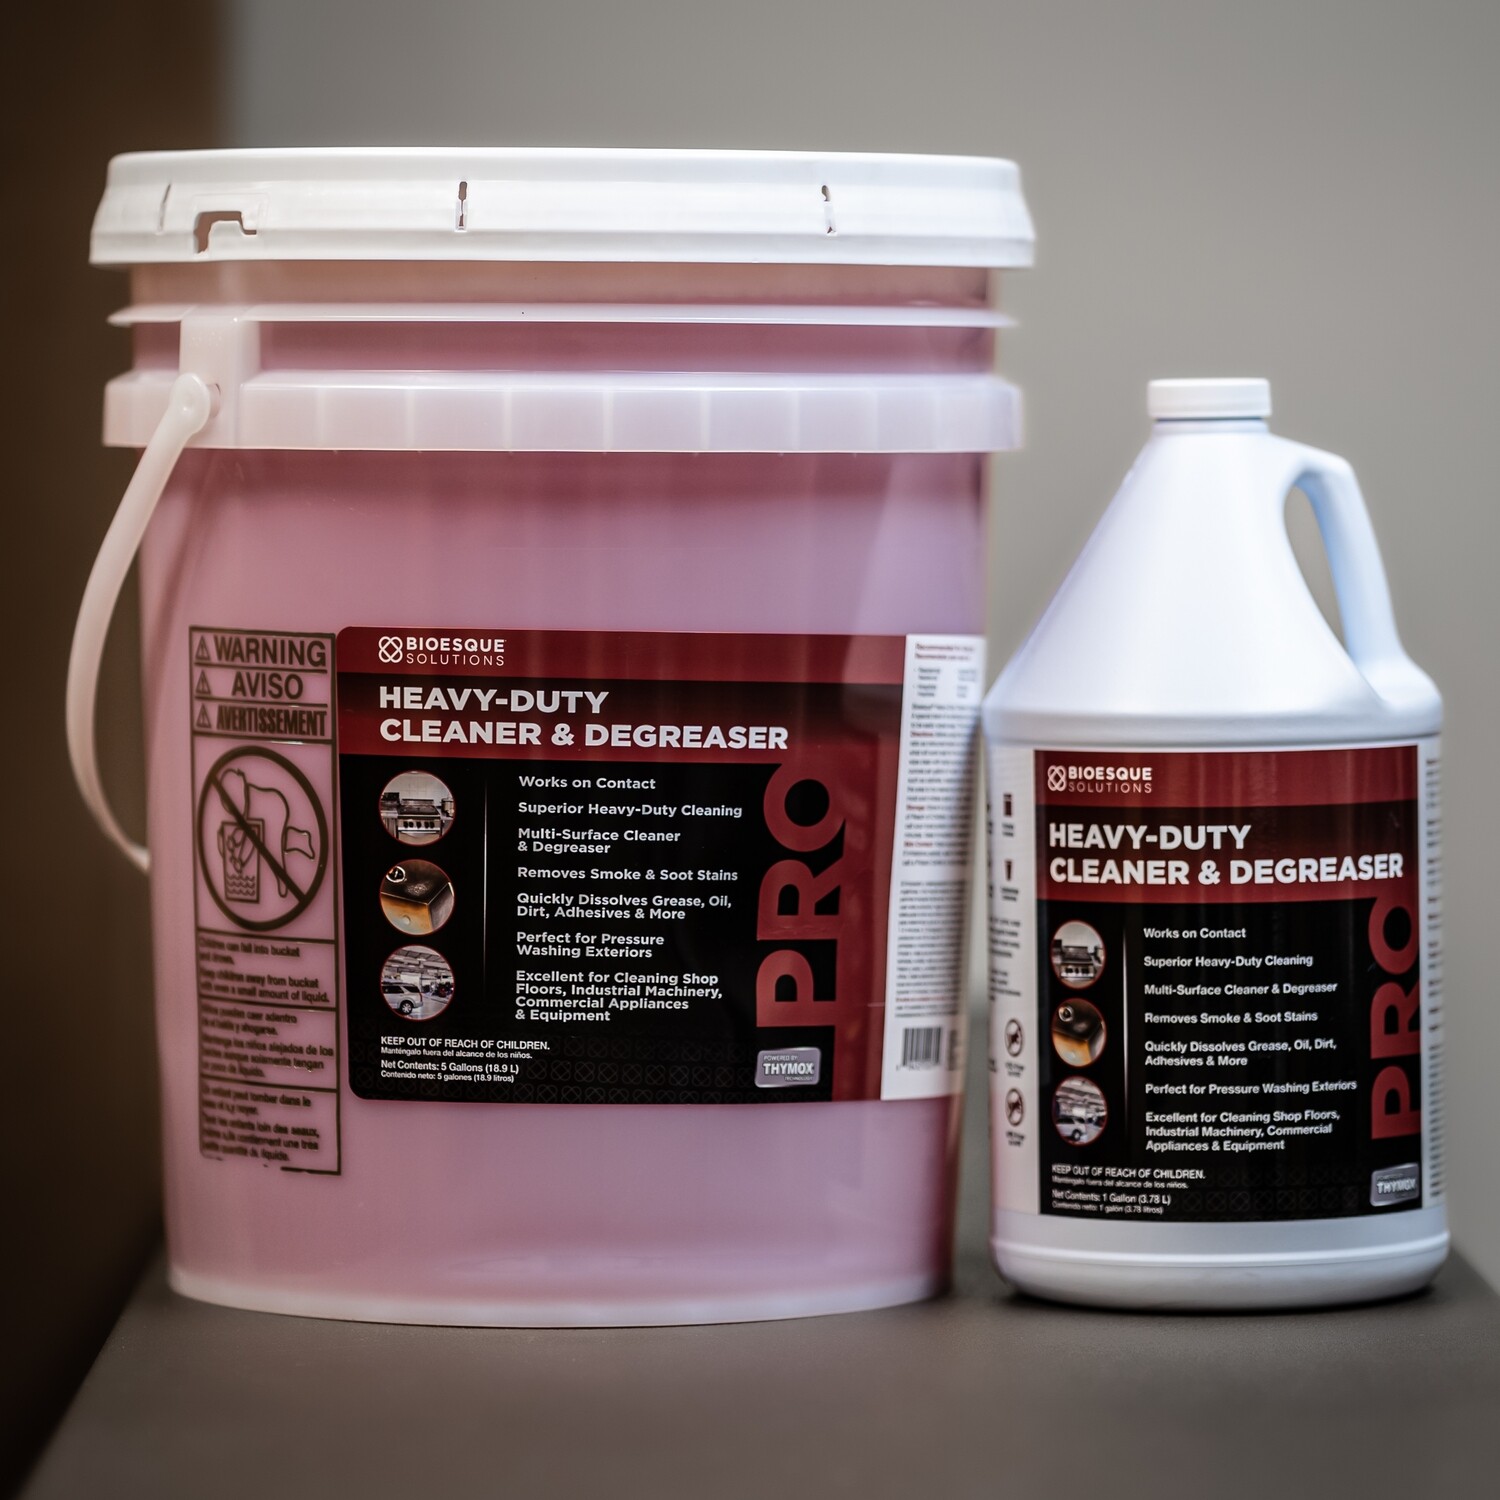 BIOESQUE HEAVY DUTY CLEANER & DEGREASER 5 GALLON